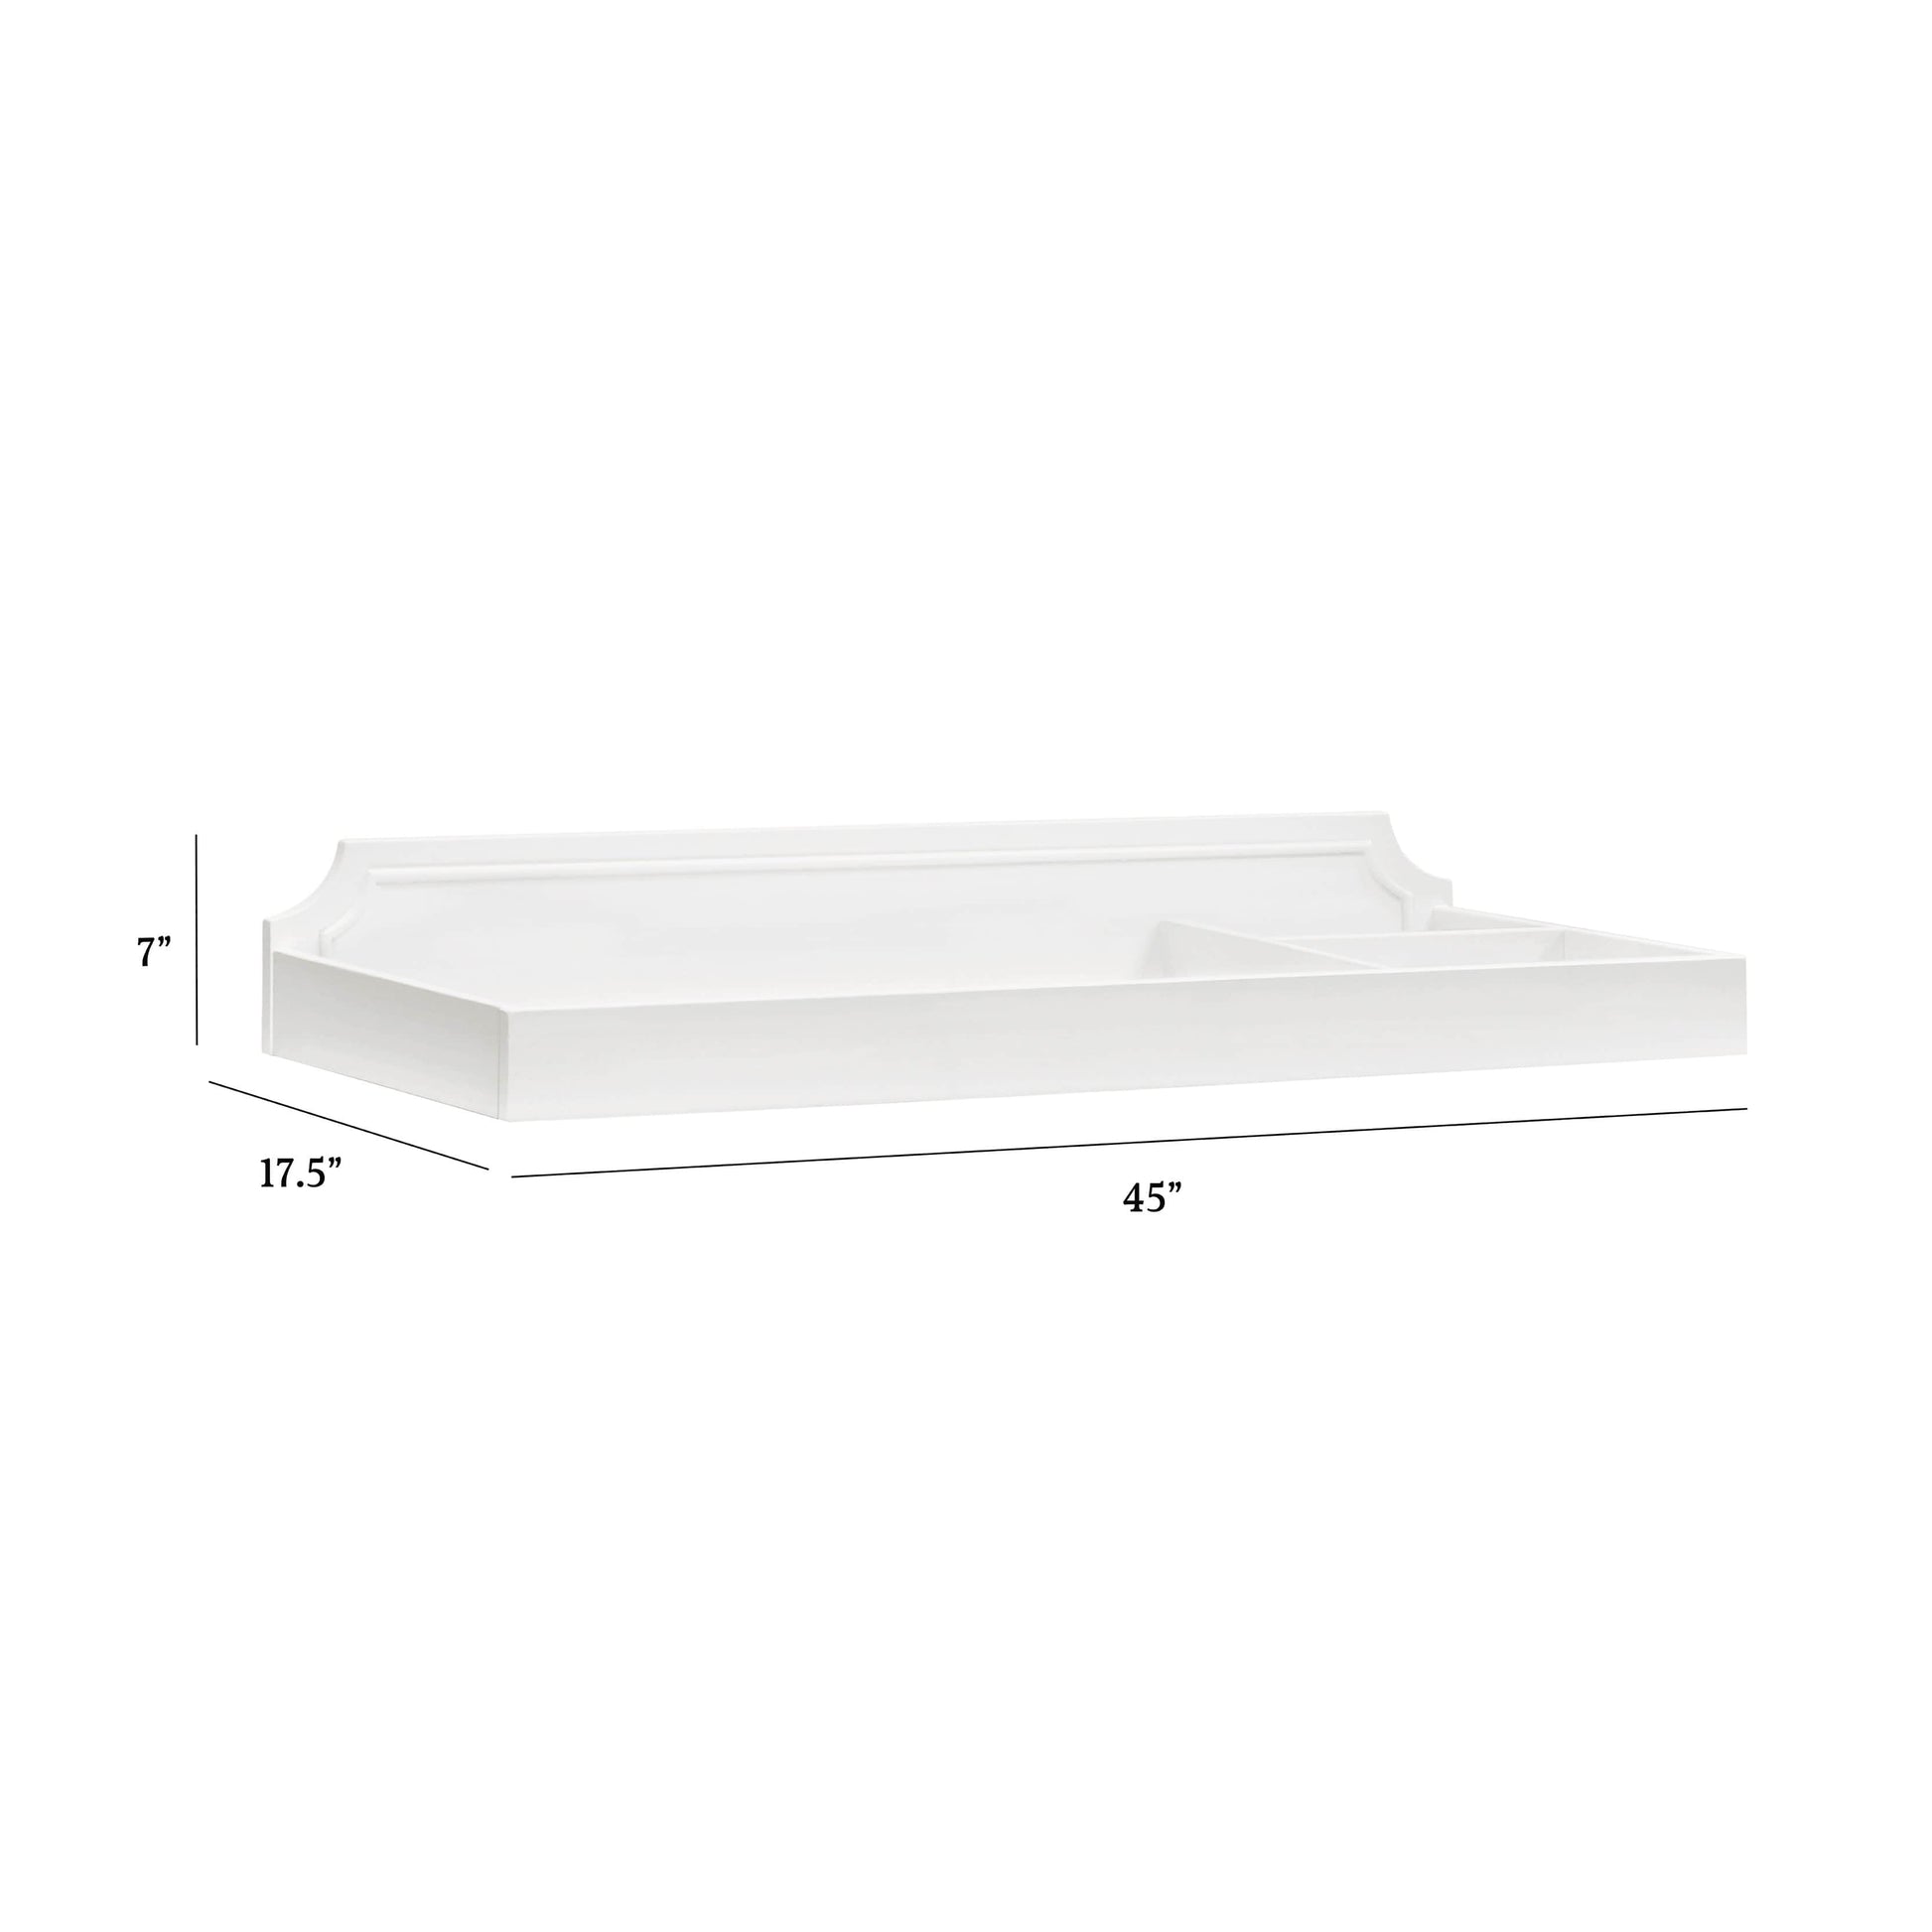 M10719RW,Emma Regency Removable Changing Tray in Warm White